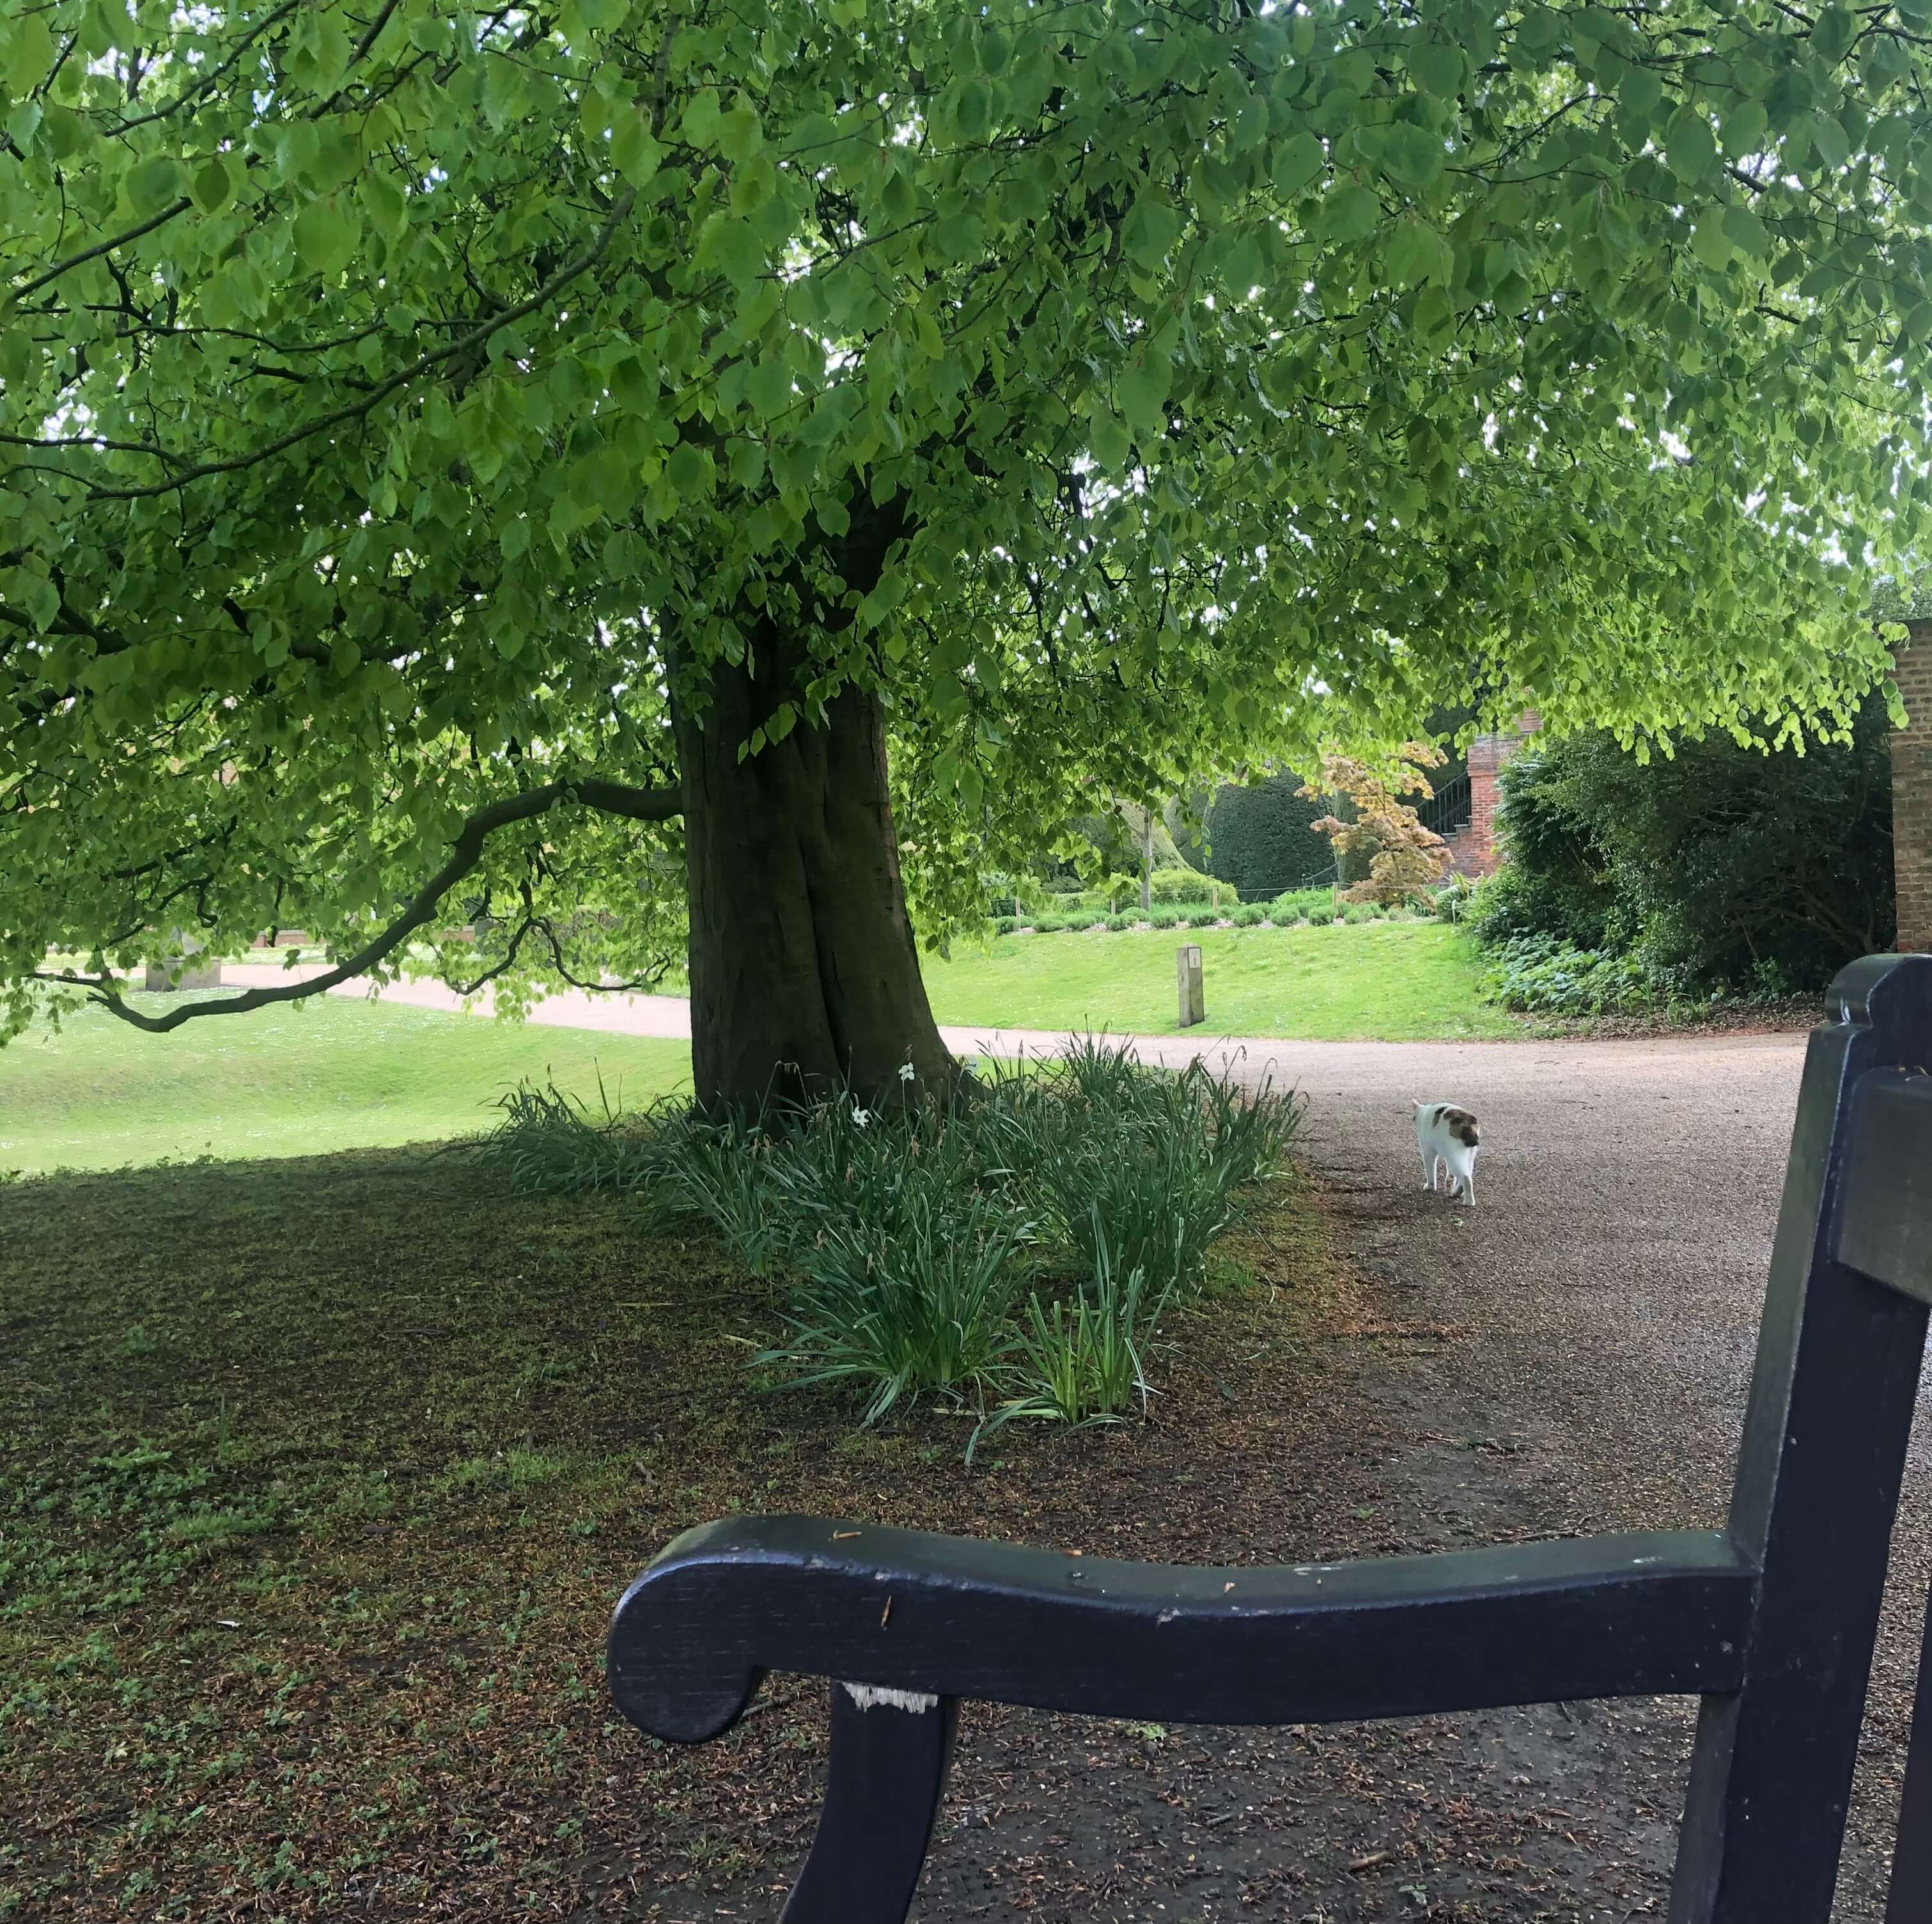 Photo of a bench next to a tree in a park with a cat, a great place to take a break from work.